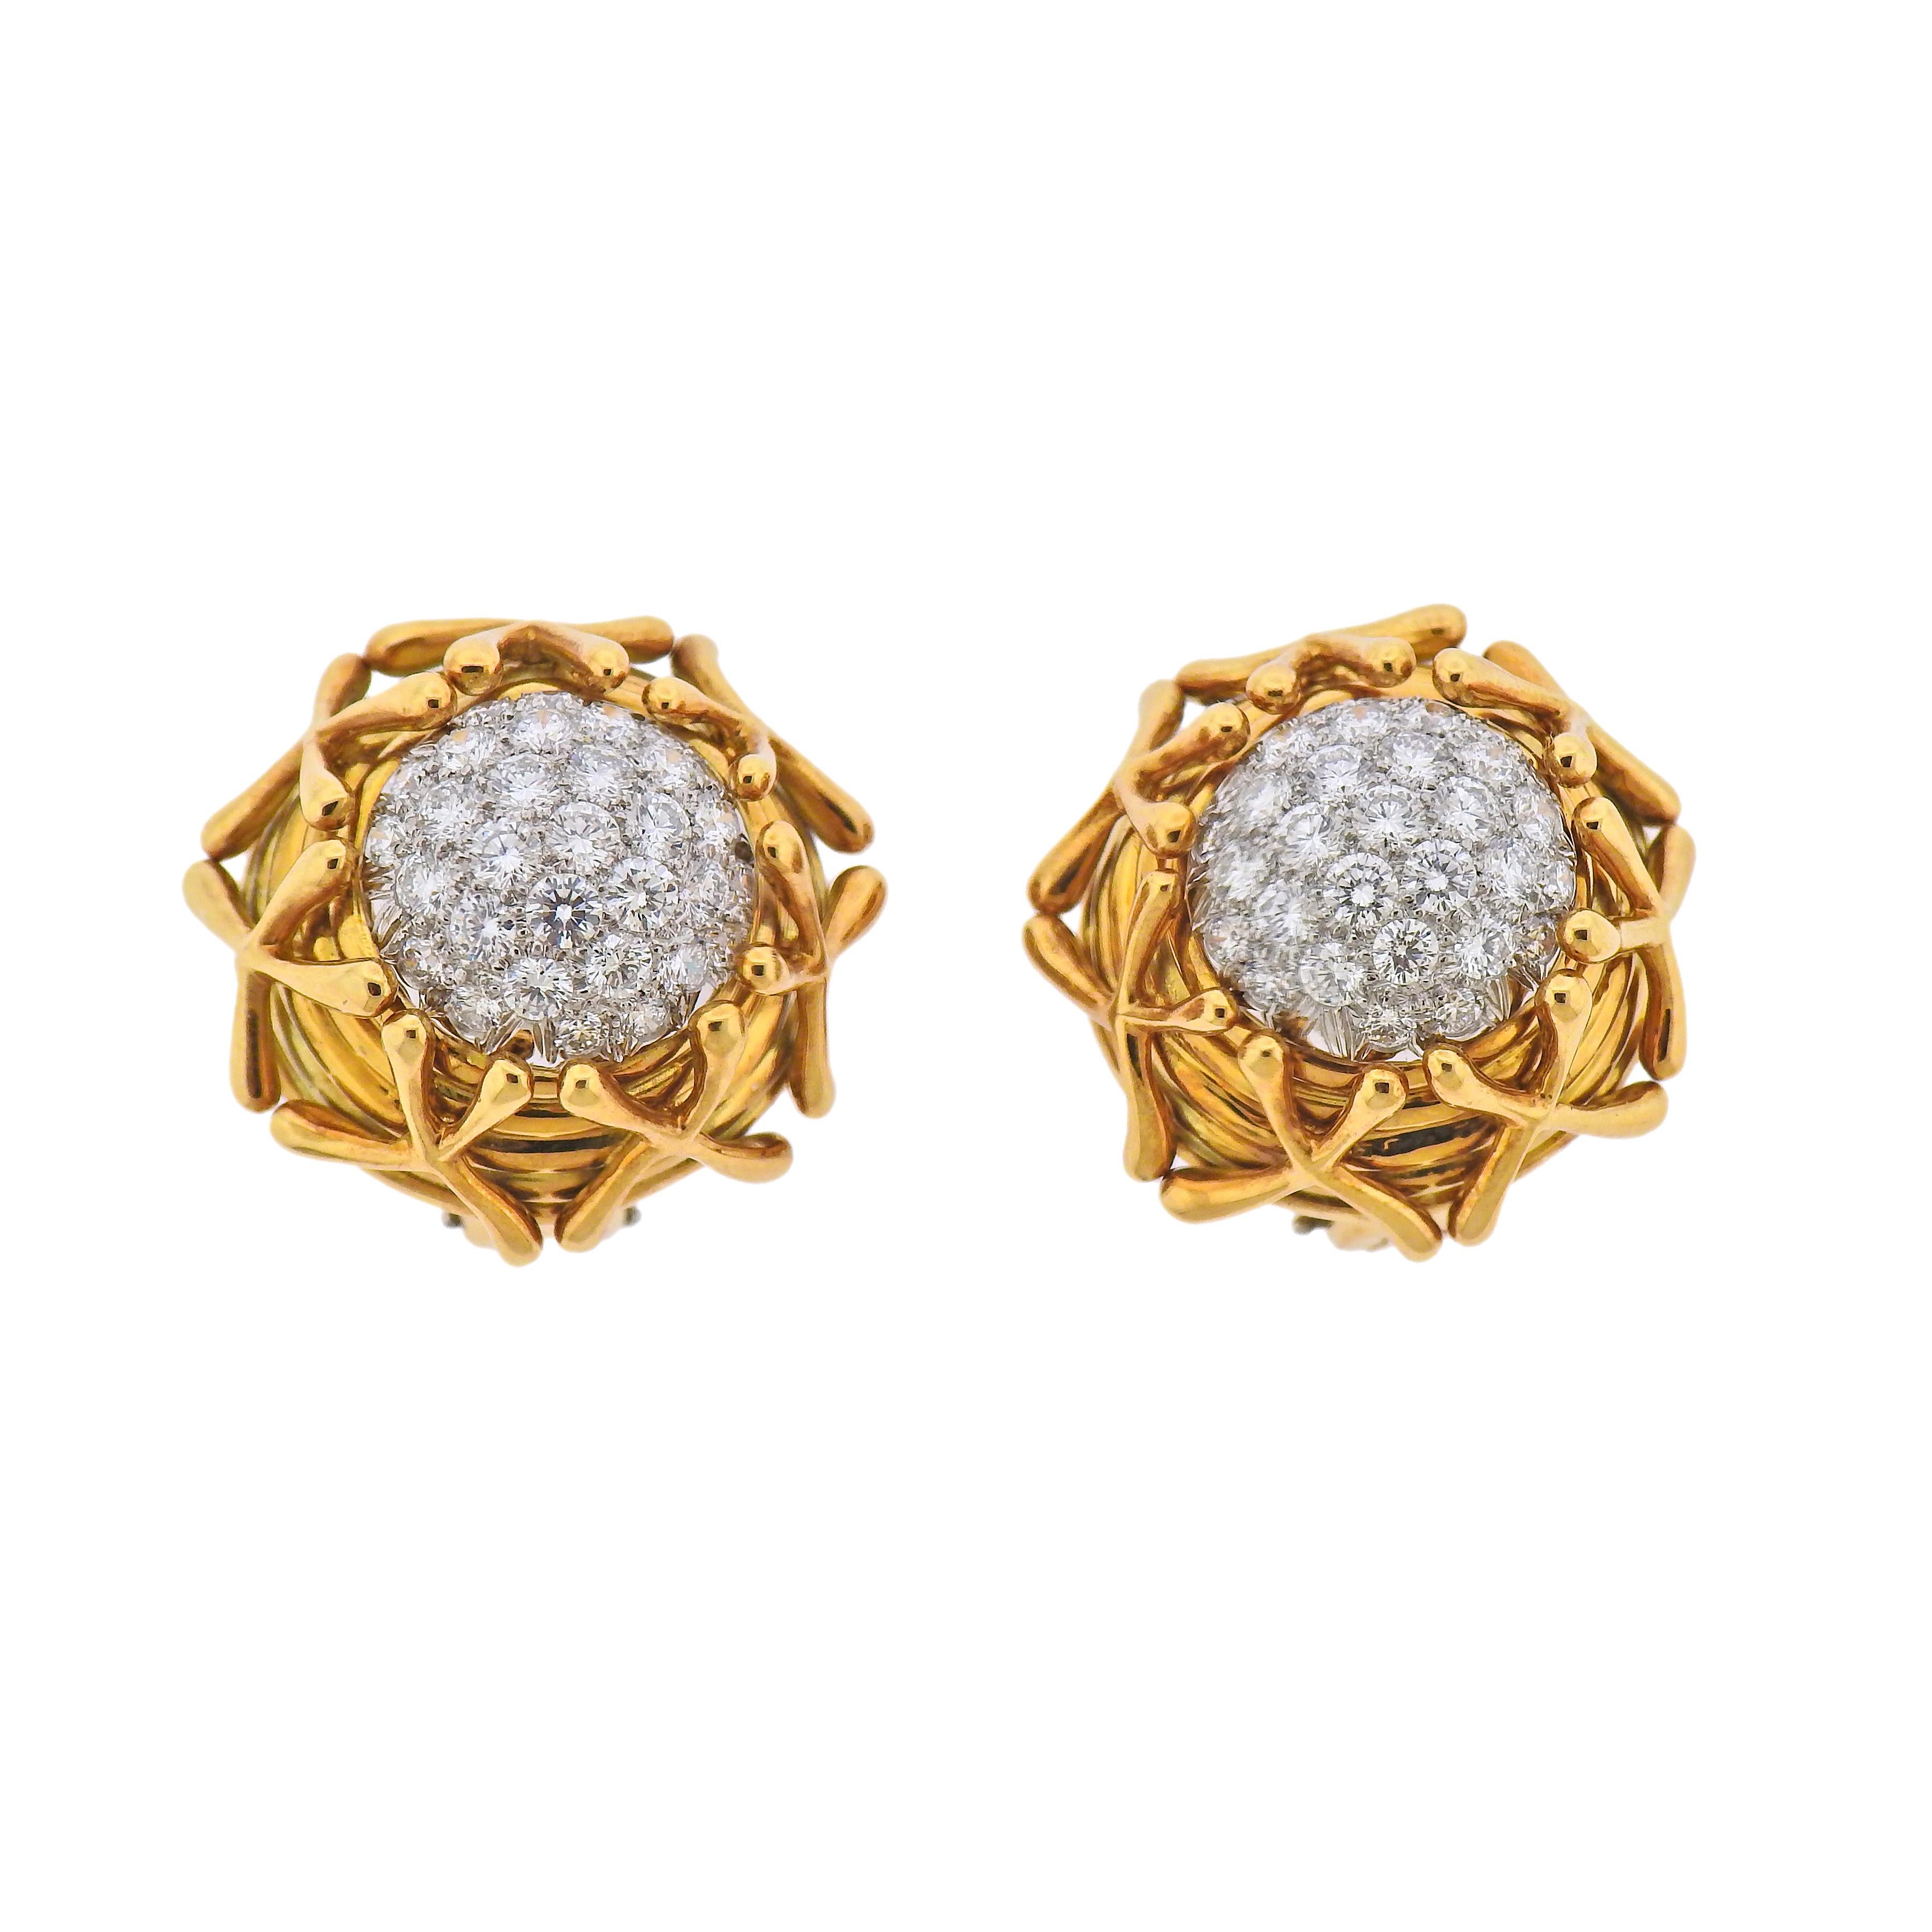 Pair of 18k gold and platinum earrings, designed by Jean Schlumberger for Tiffany & Co, set with approx. 2.00cts in diamonds. Earrings are 23mm in diameter. Marked: Tiffany & Co, Schlumberger, pt950, 750. Weight - 32.4 grams.